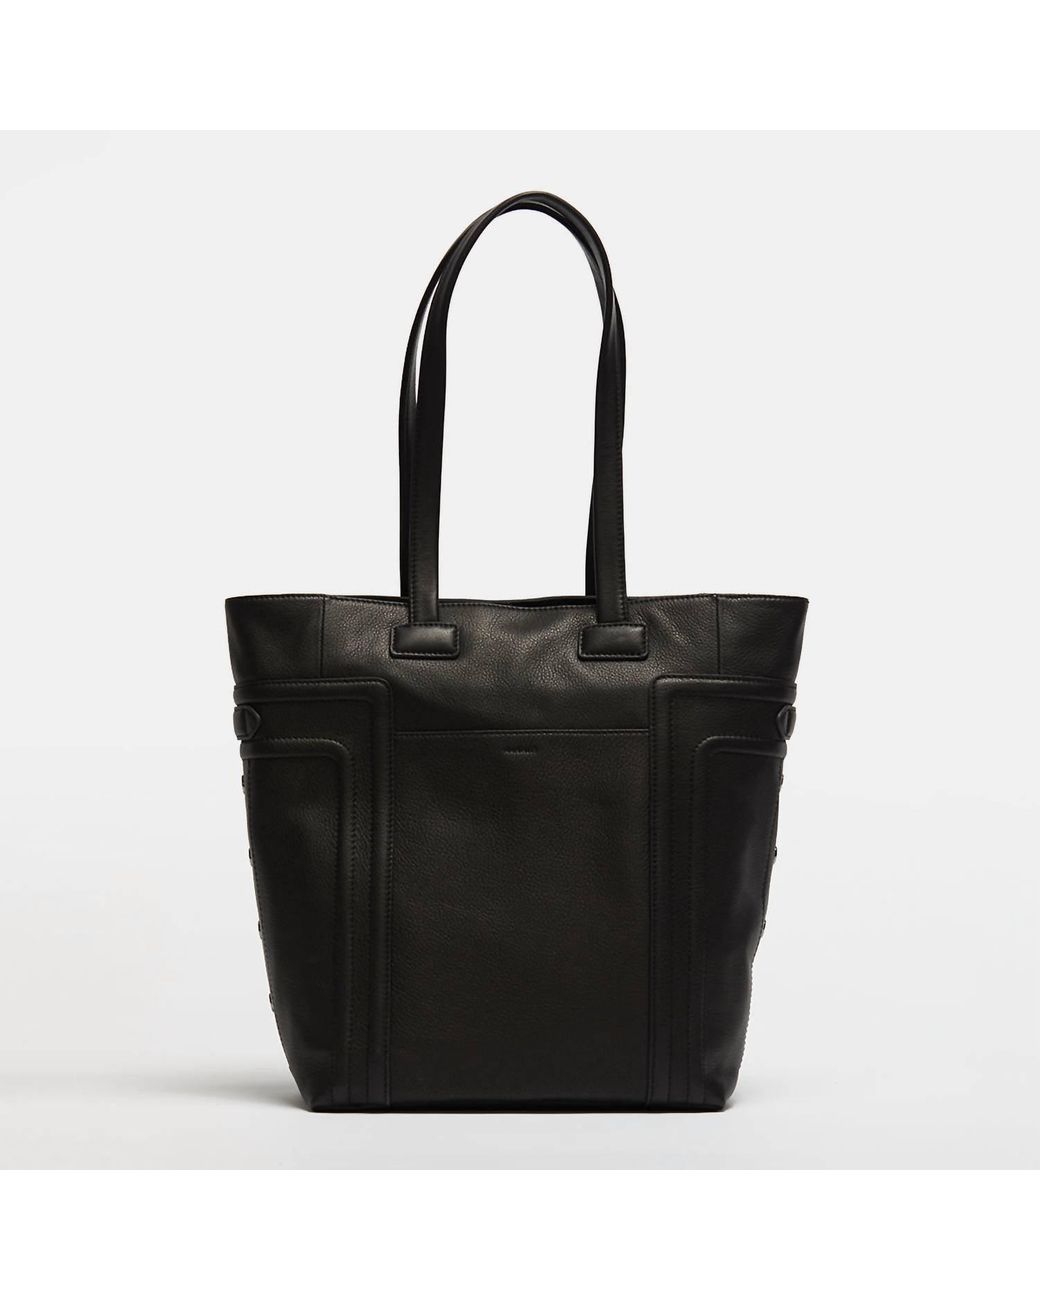 Women's ROSA.K Tote bags from $210